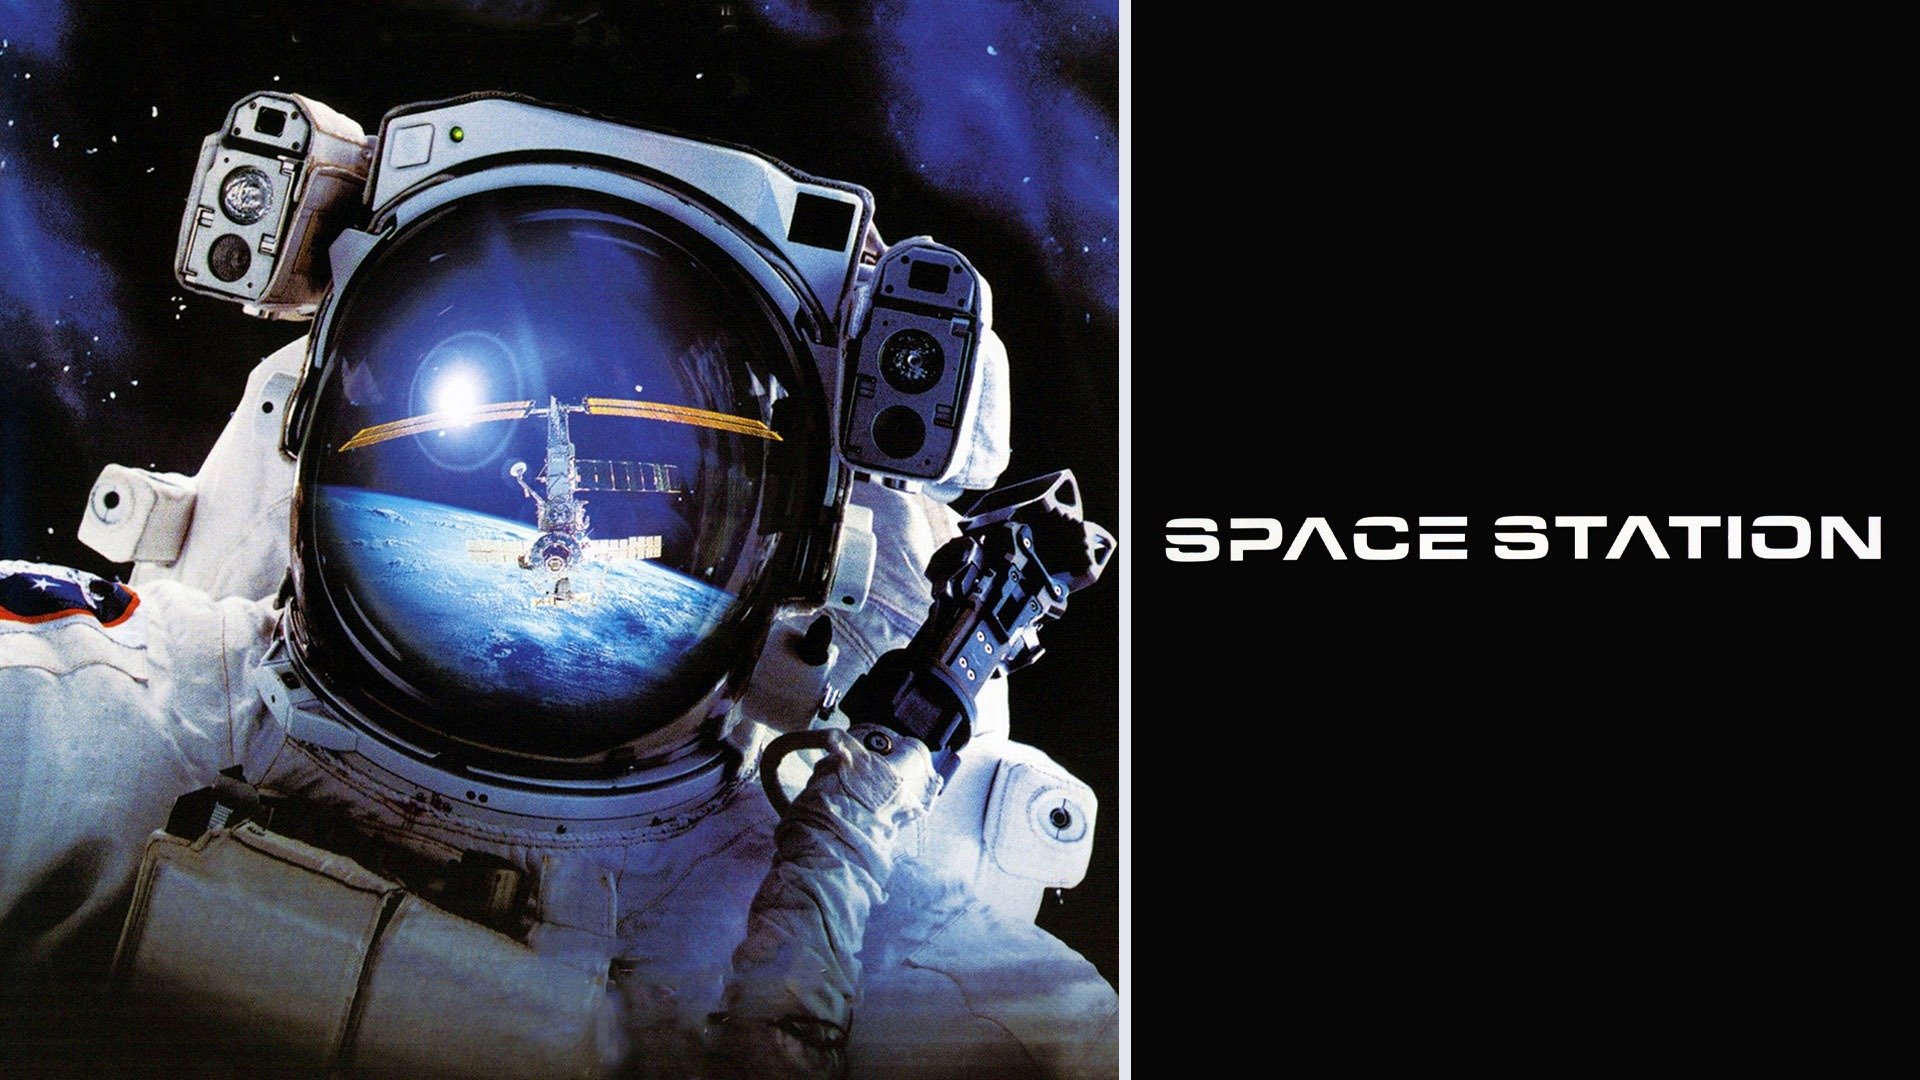 space station 3d imax review